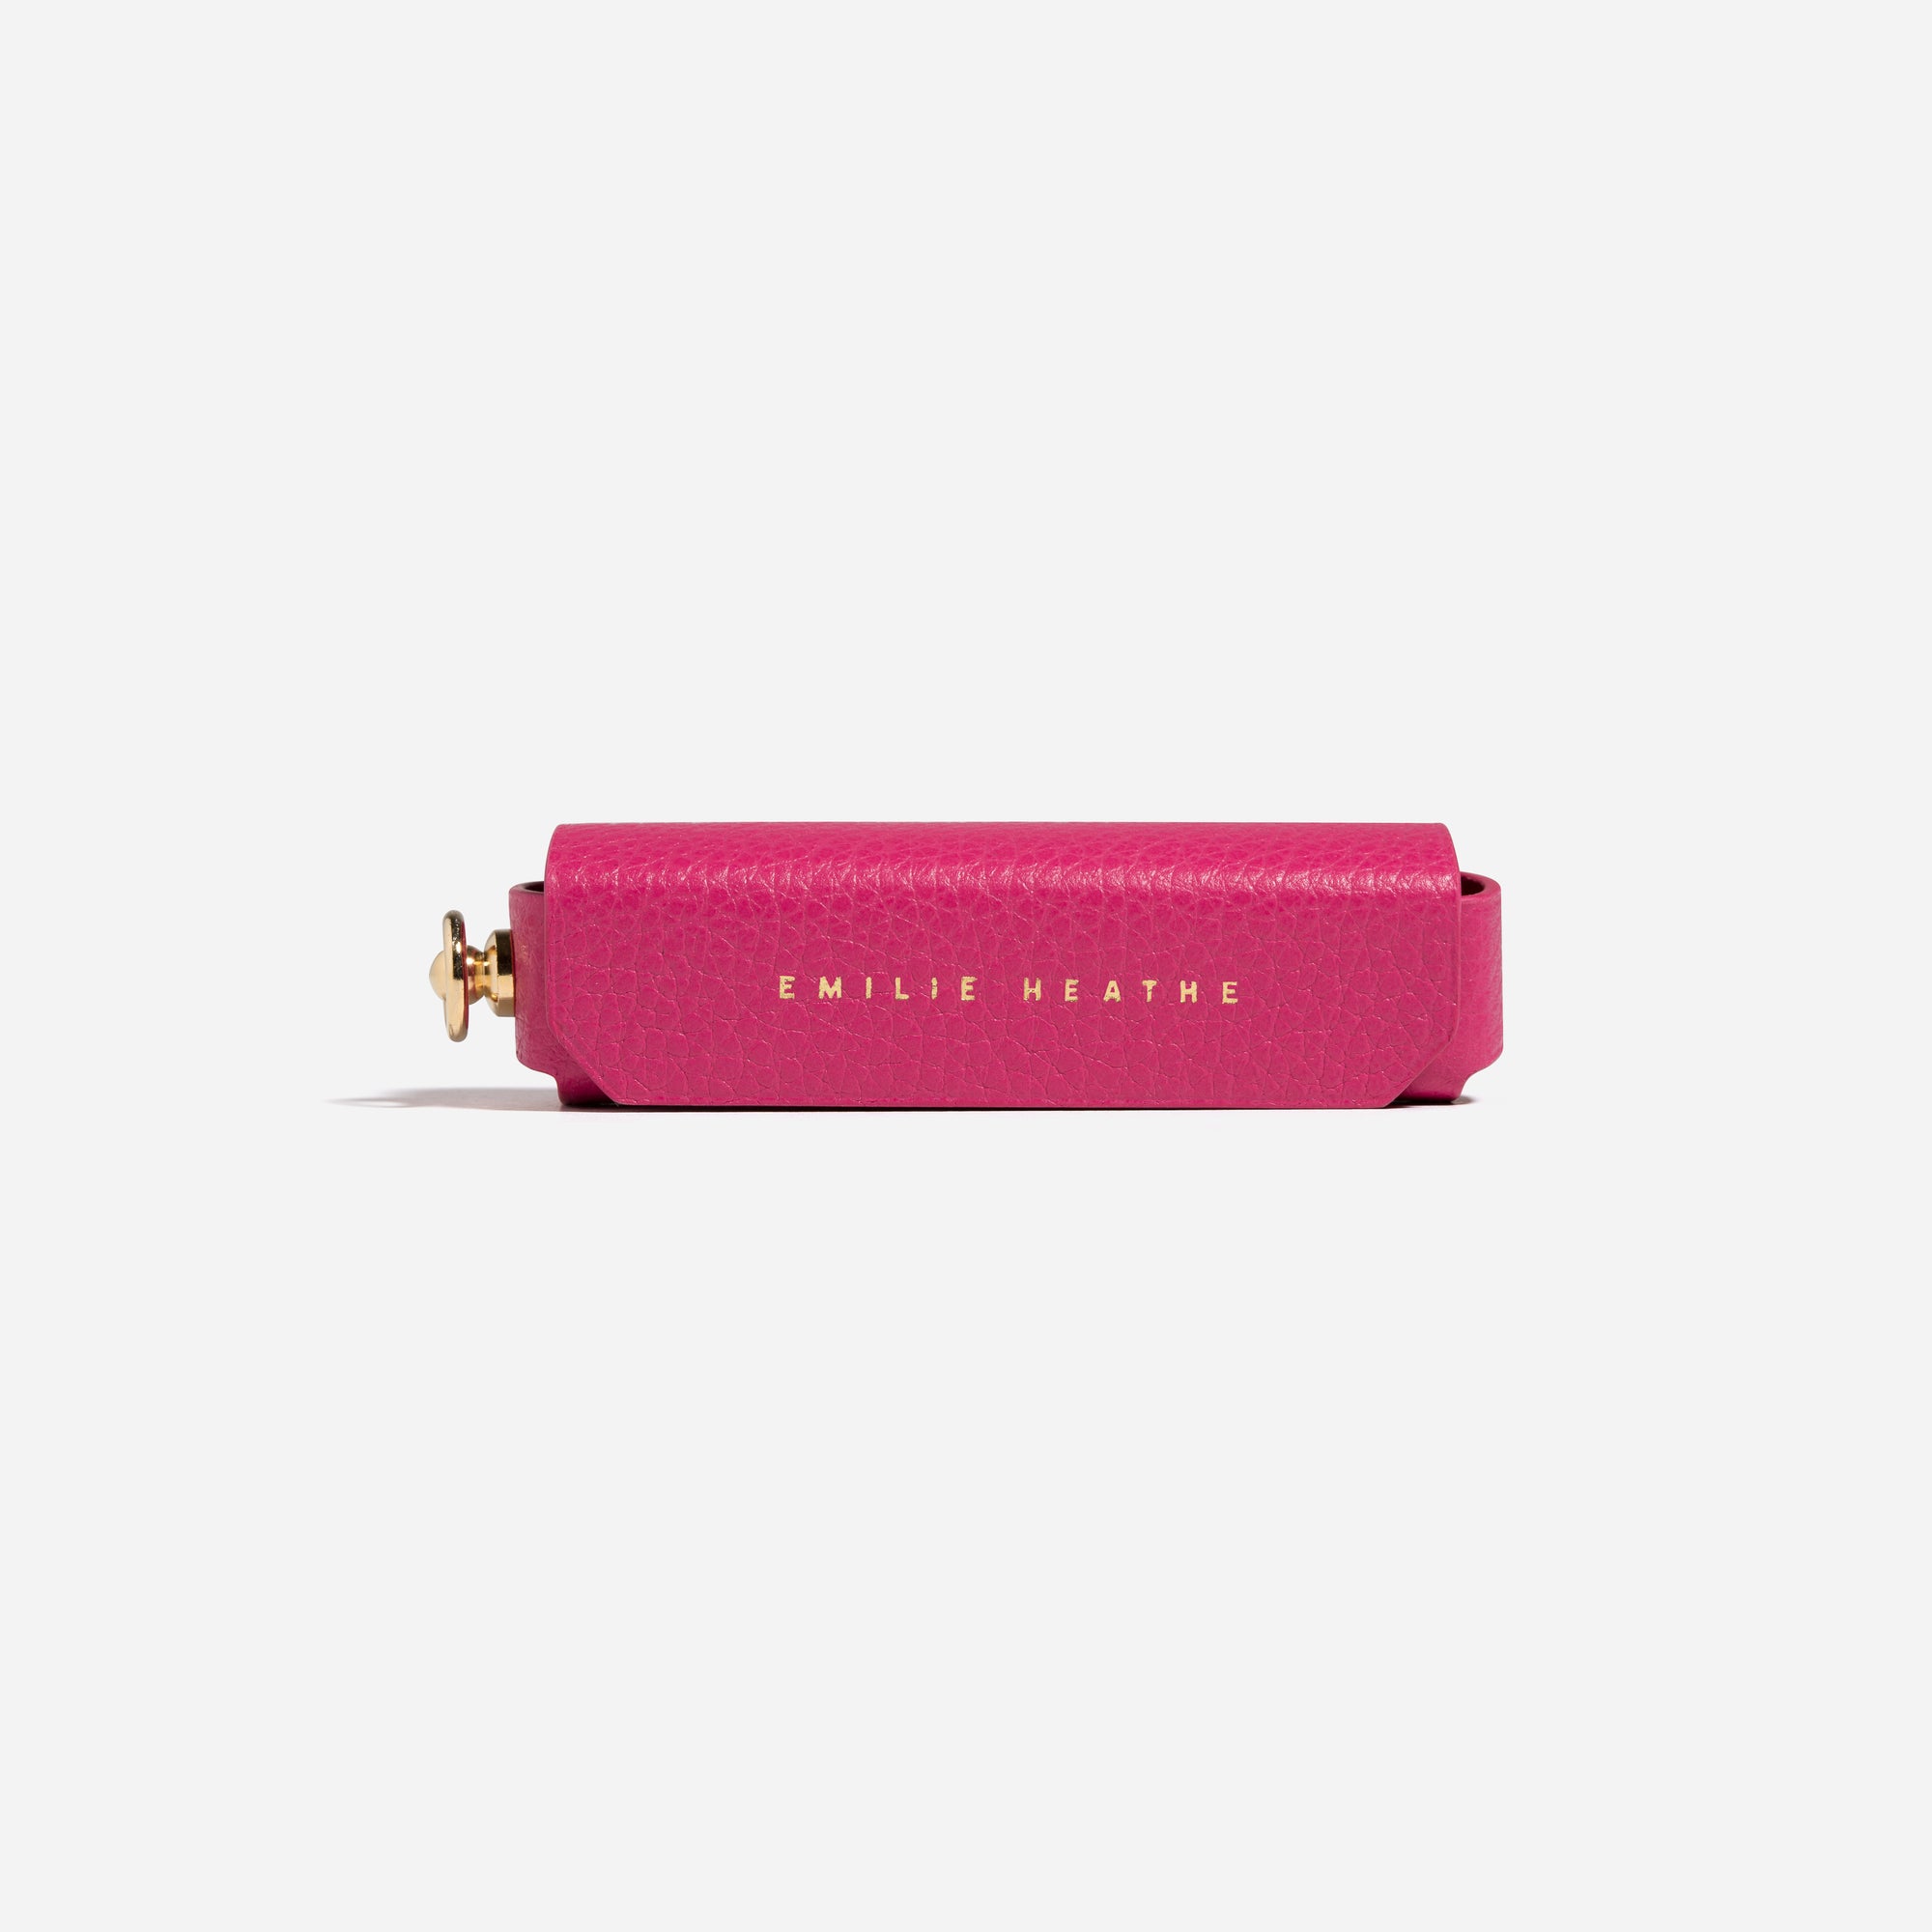 The Leather Lip Atelier Case - Rose